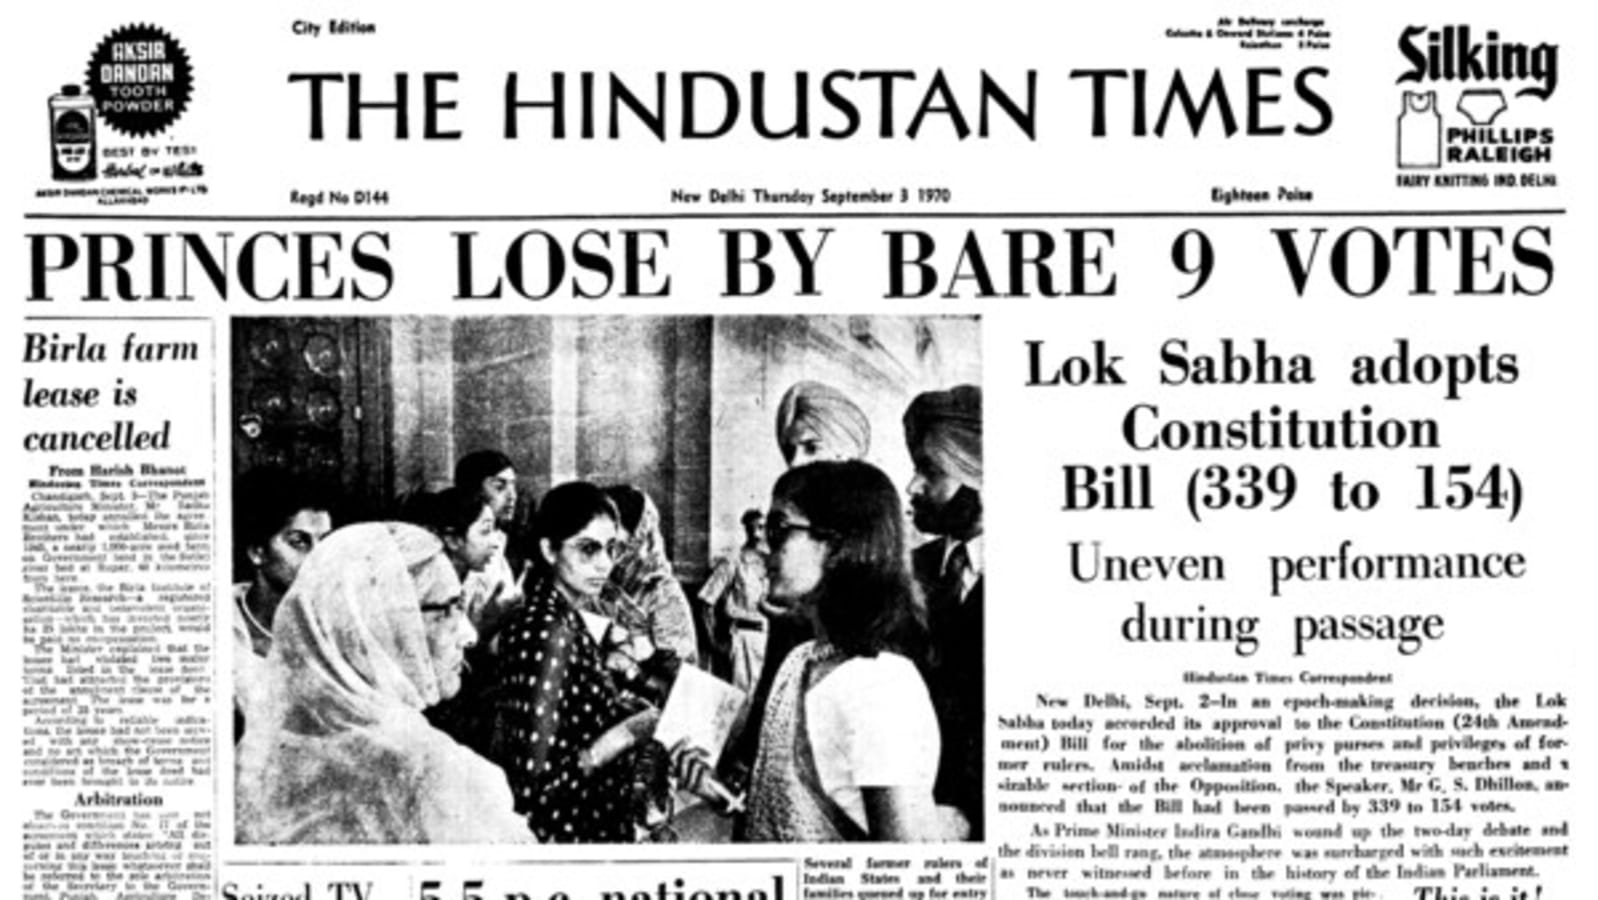 Dr.Hari Desai - Breach of Faith: Abolition of Privy Purses • For her own  populist politics PM Indira Gandhi got rid of Sardar Patel's commitment to  the Rulers • On 28 December